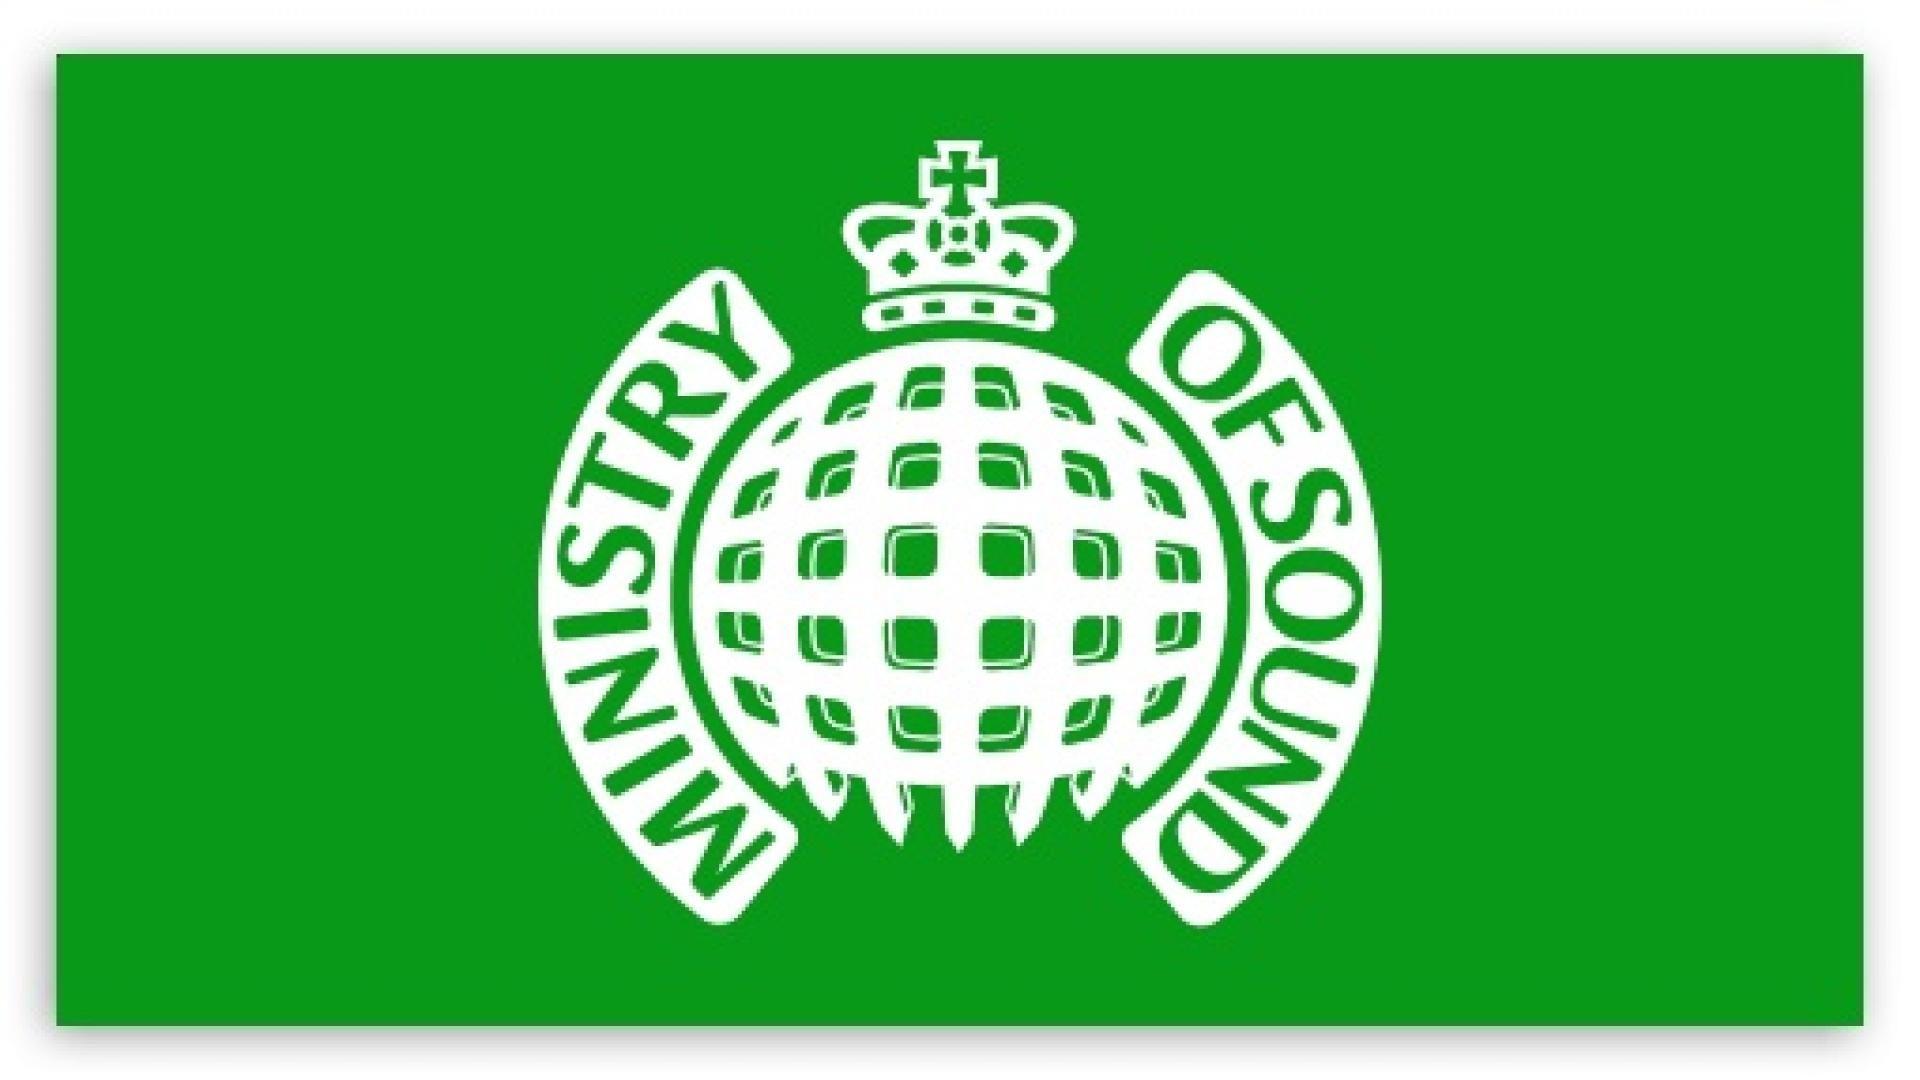 Ministry Of Sound Wallpaper #J6PRWZX